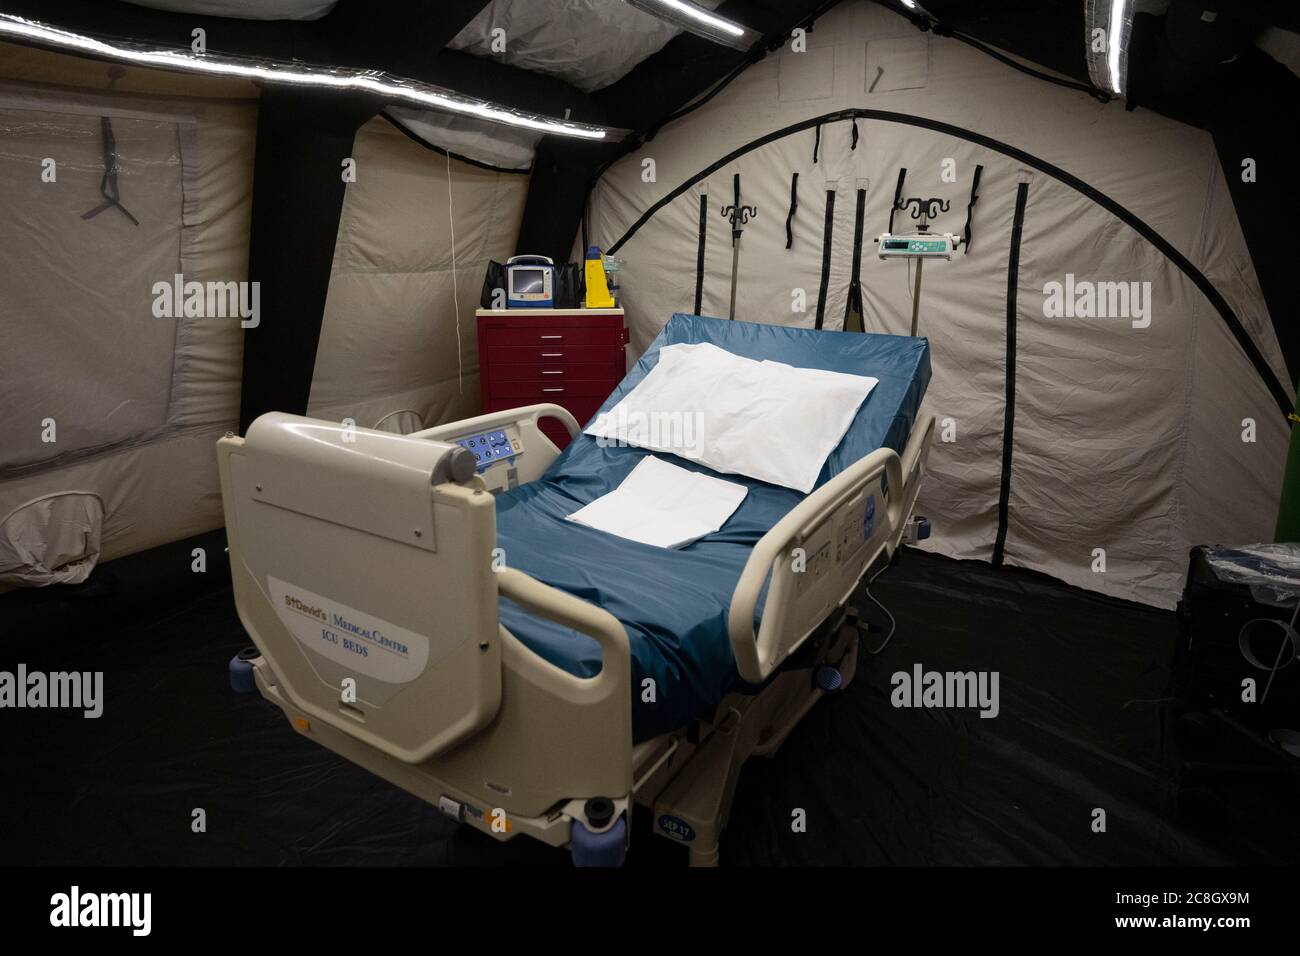 Austin, TX USA July 24, 2020: City officials prepare a field hospital, including this acute care unit, in the Austin Convention Center in anticipation of a rush of COVID-19 patients as numbers of infected Texans continue to spike. The hospital is prepared to handle hundreds of mild to moderate cases that are overwhelming hospitals in the Rio Grande Valley. Credit: Bob Daemmrich/Alamy Live News Stock Photo